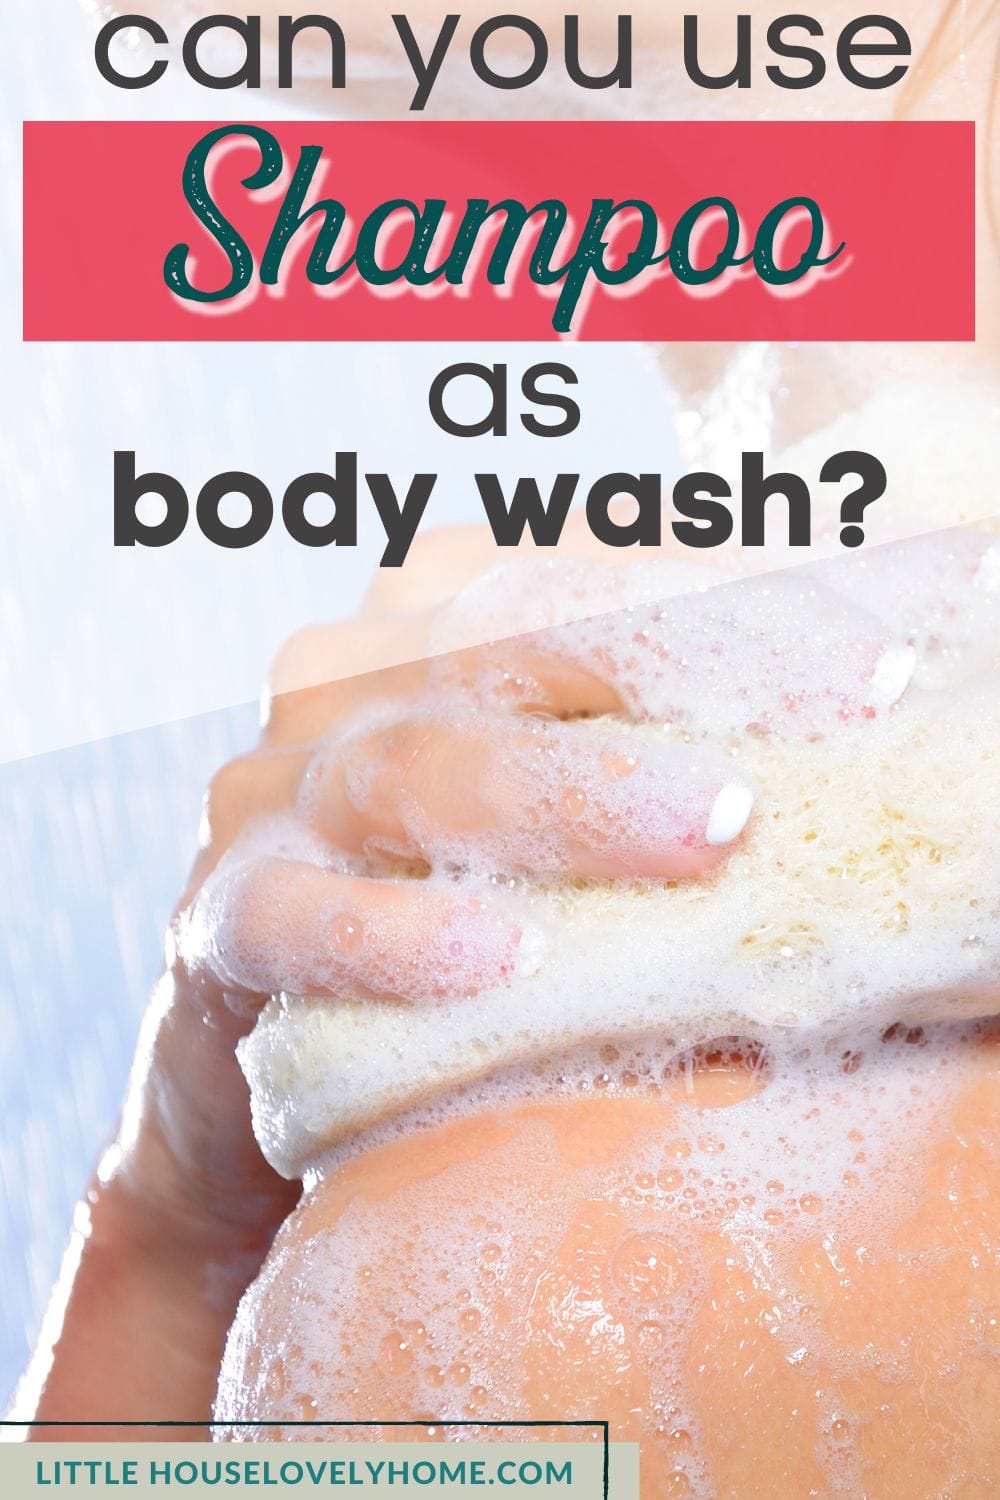 Image showing a woman taking a bath with text overlay that reads Can You Use Shampoo as Body Wash